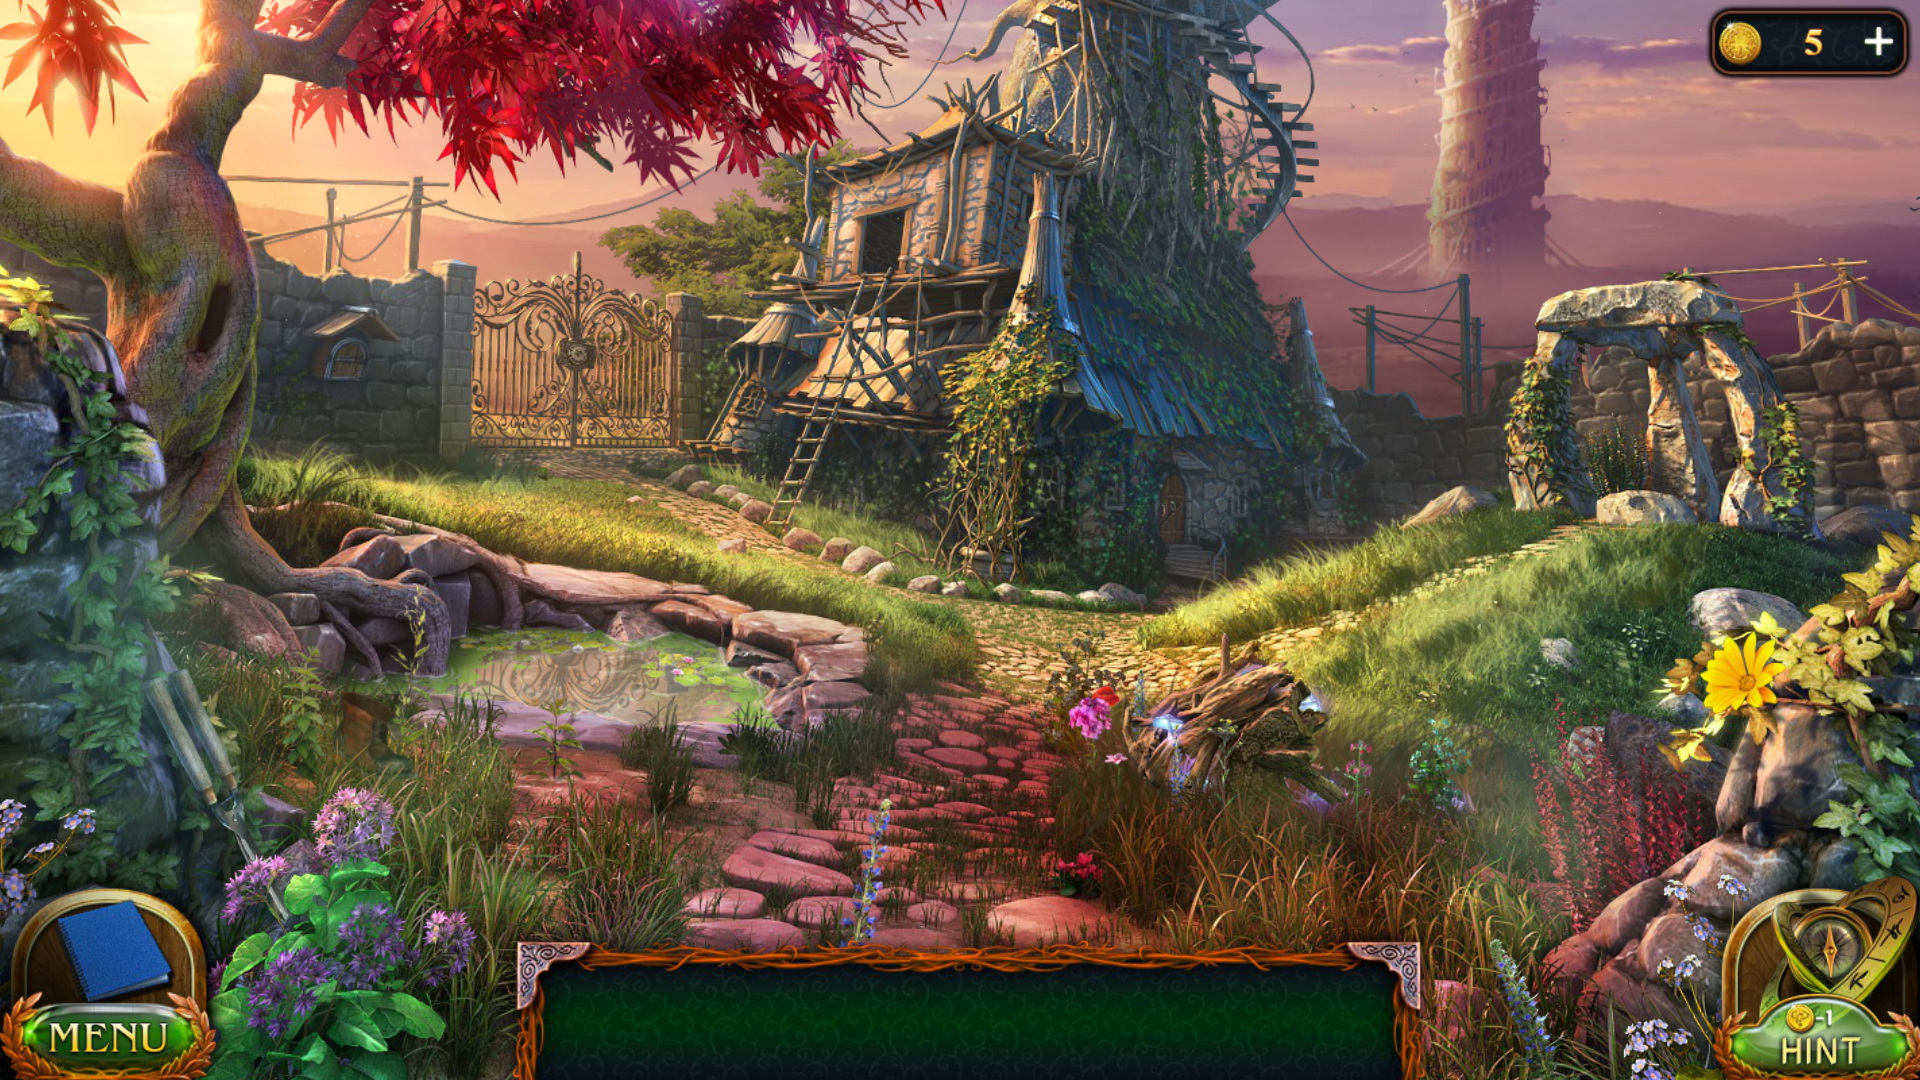 Lost Lands 5 free to play APK para Android - Download